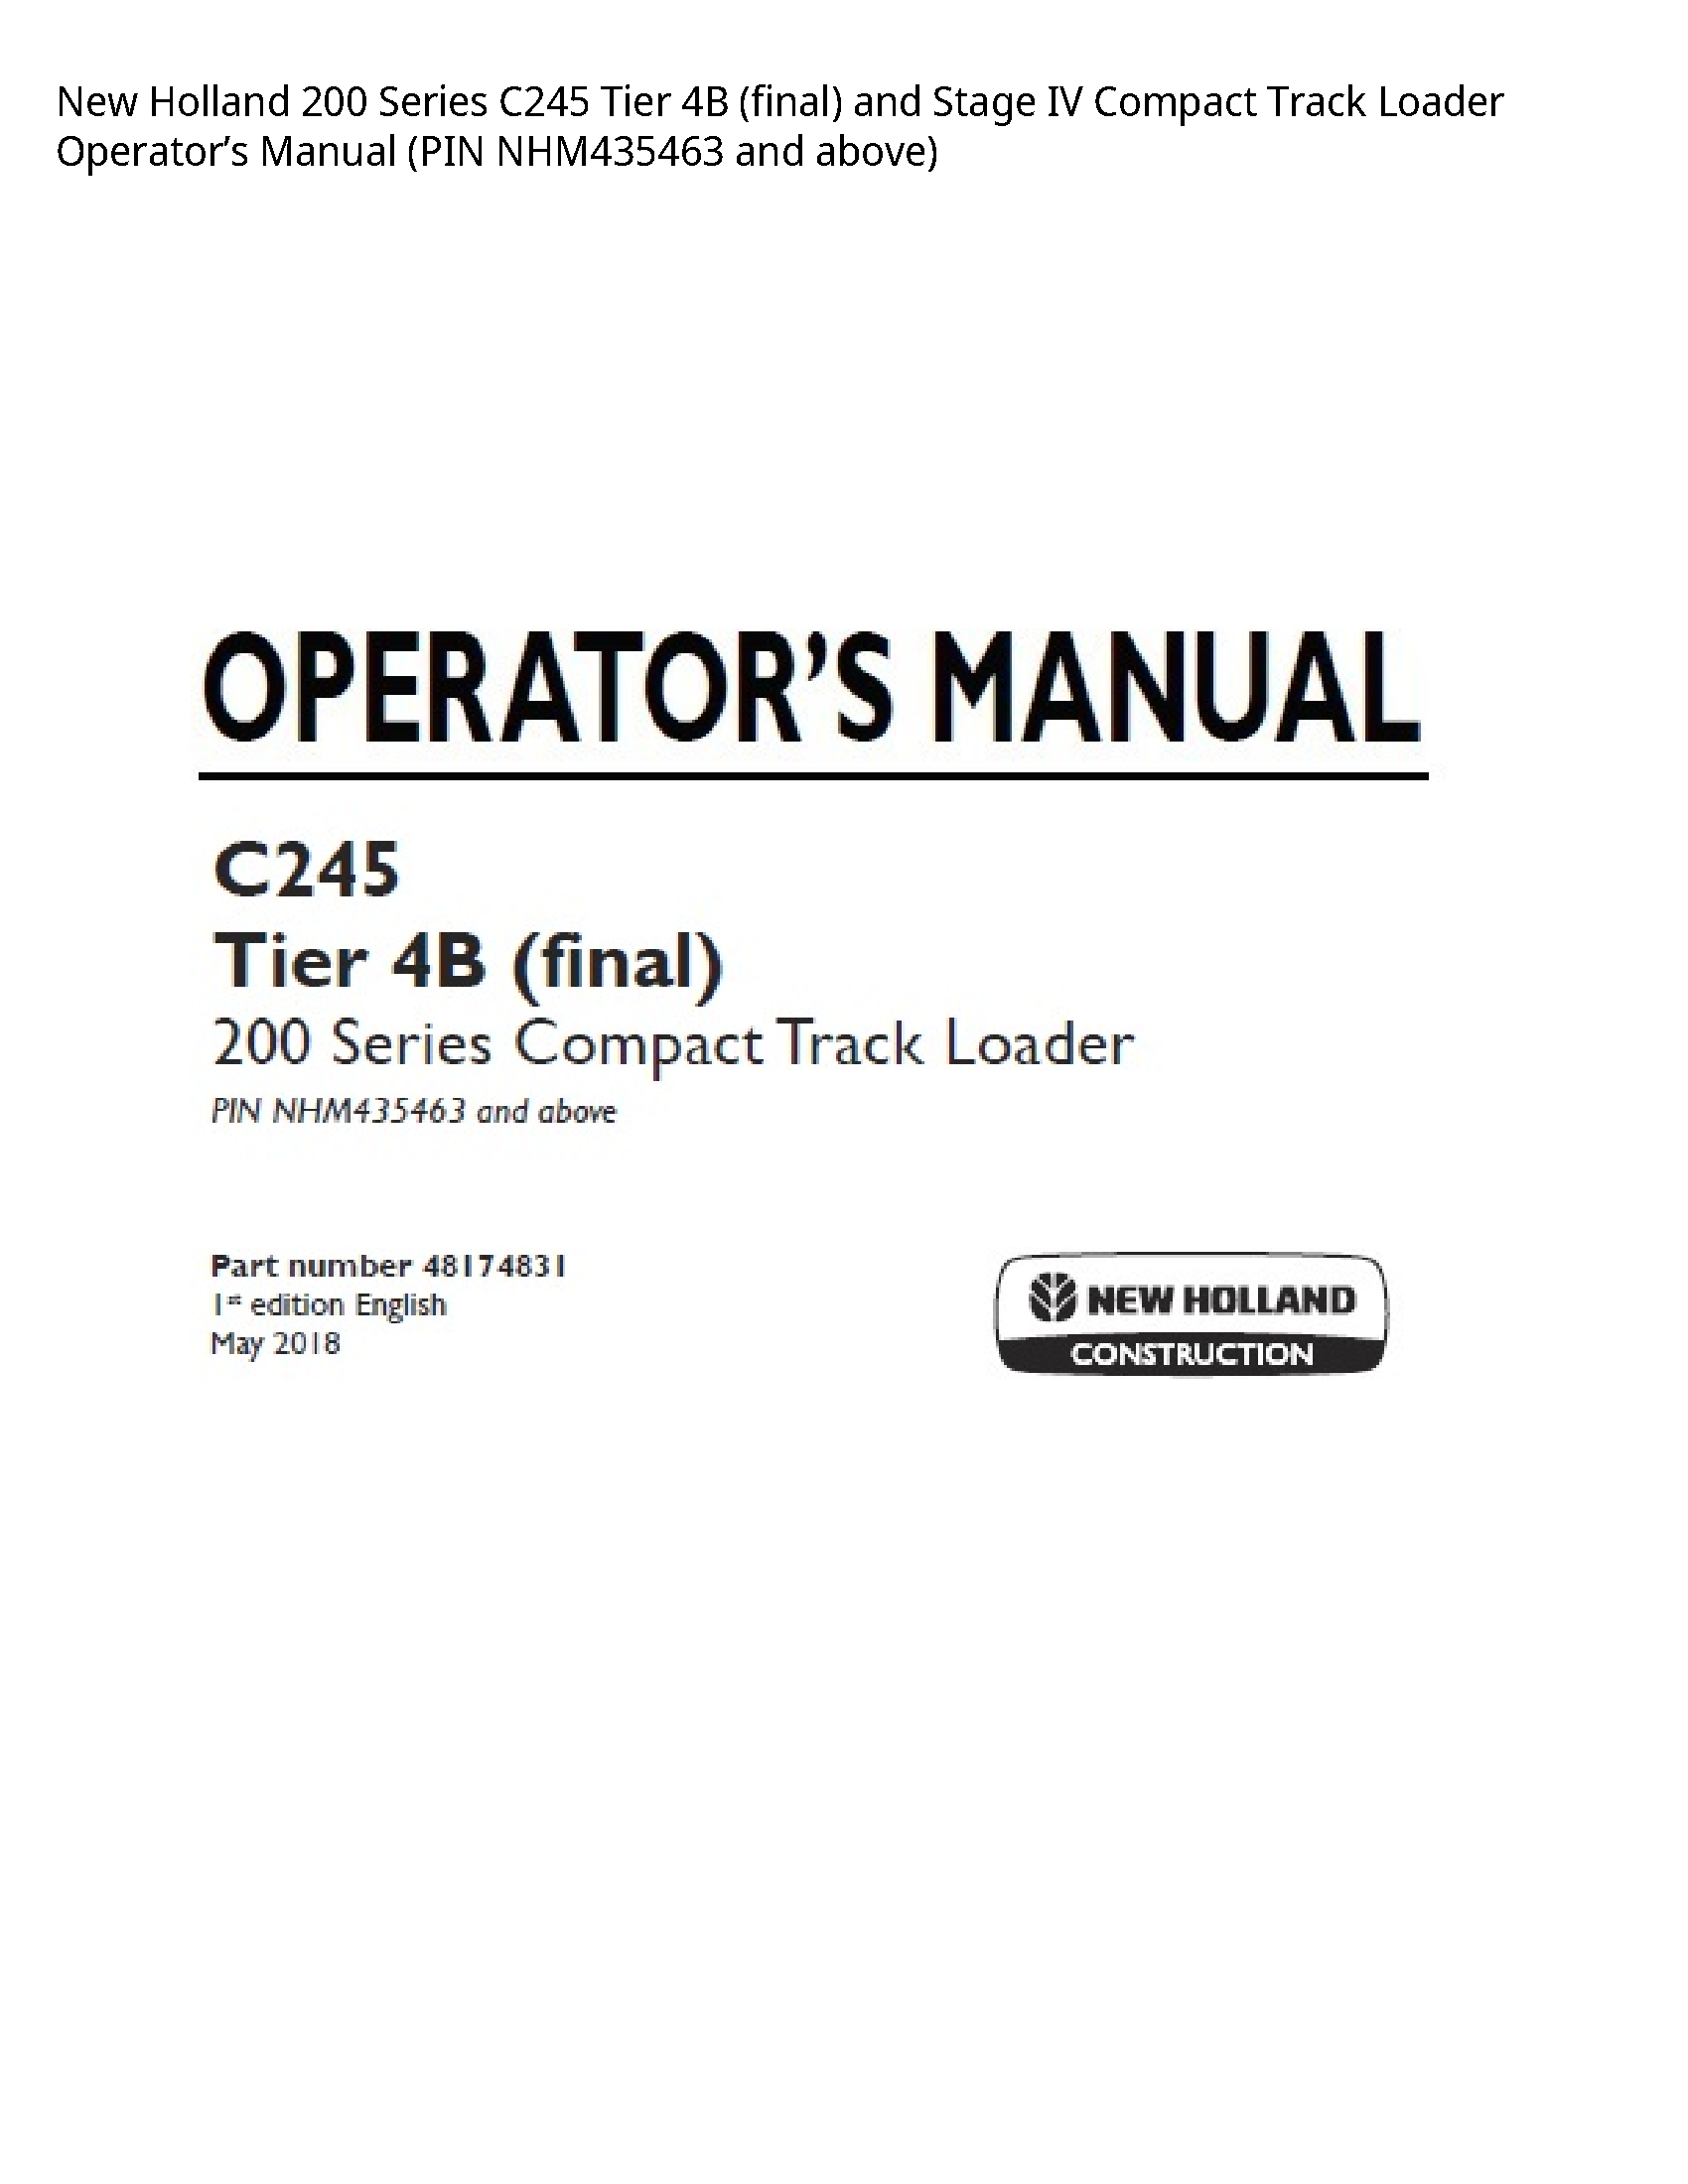 New Holland 200 Series Tier (final)  Stage IV Compact Track Loader Operator’s manual